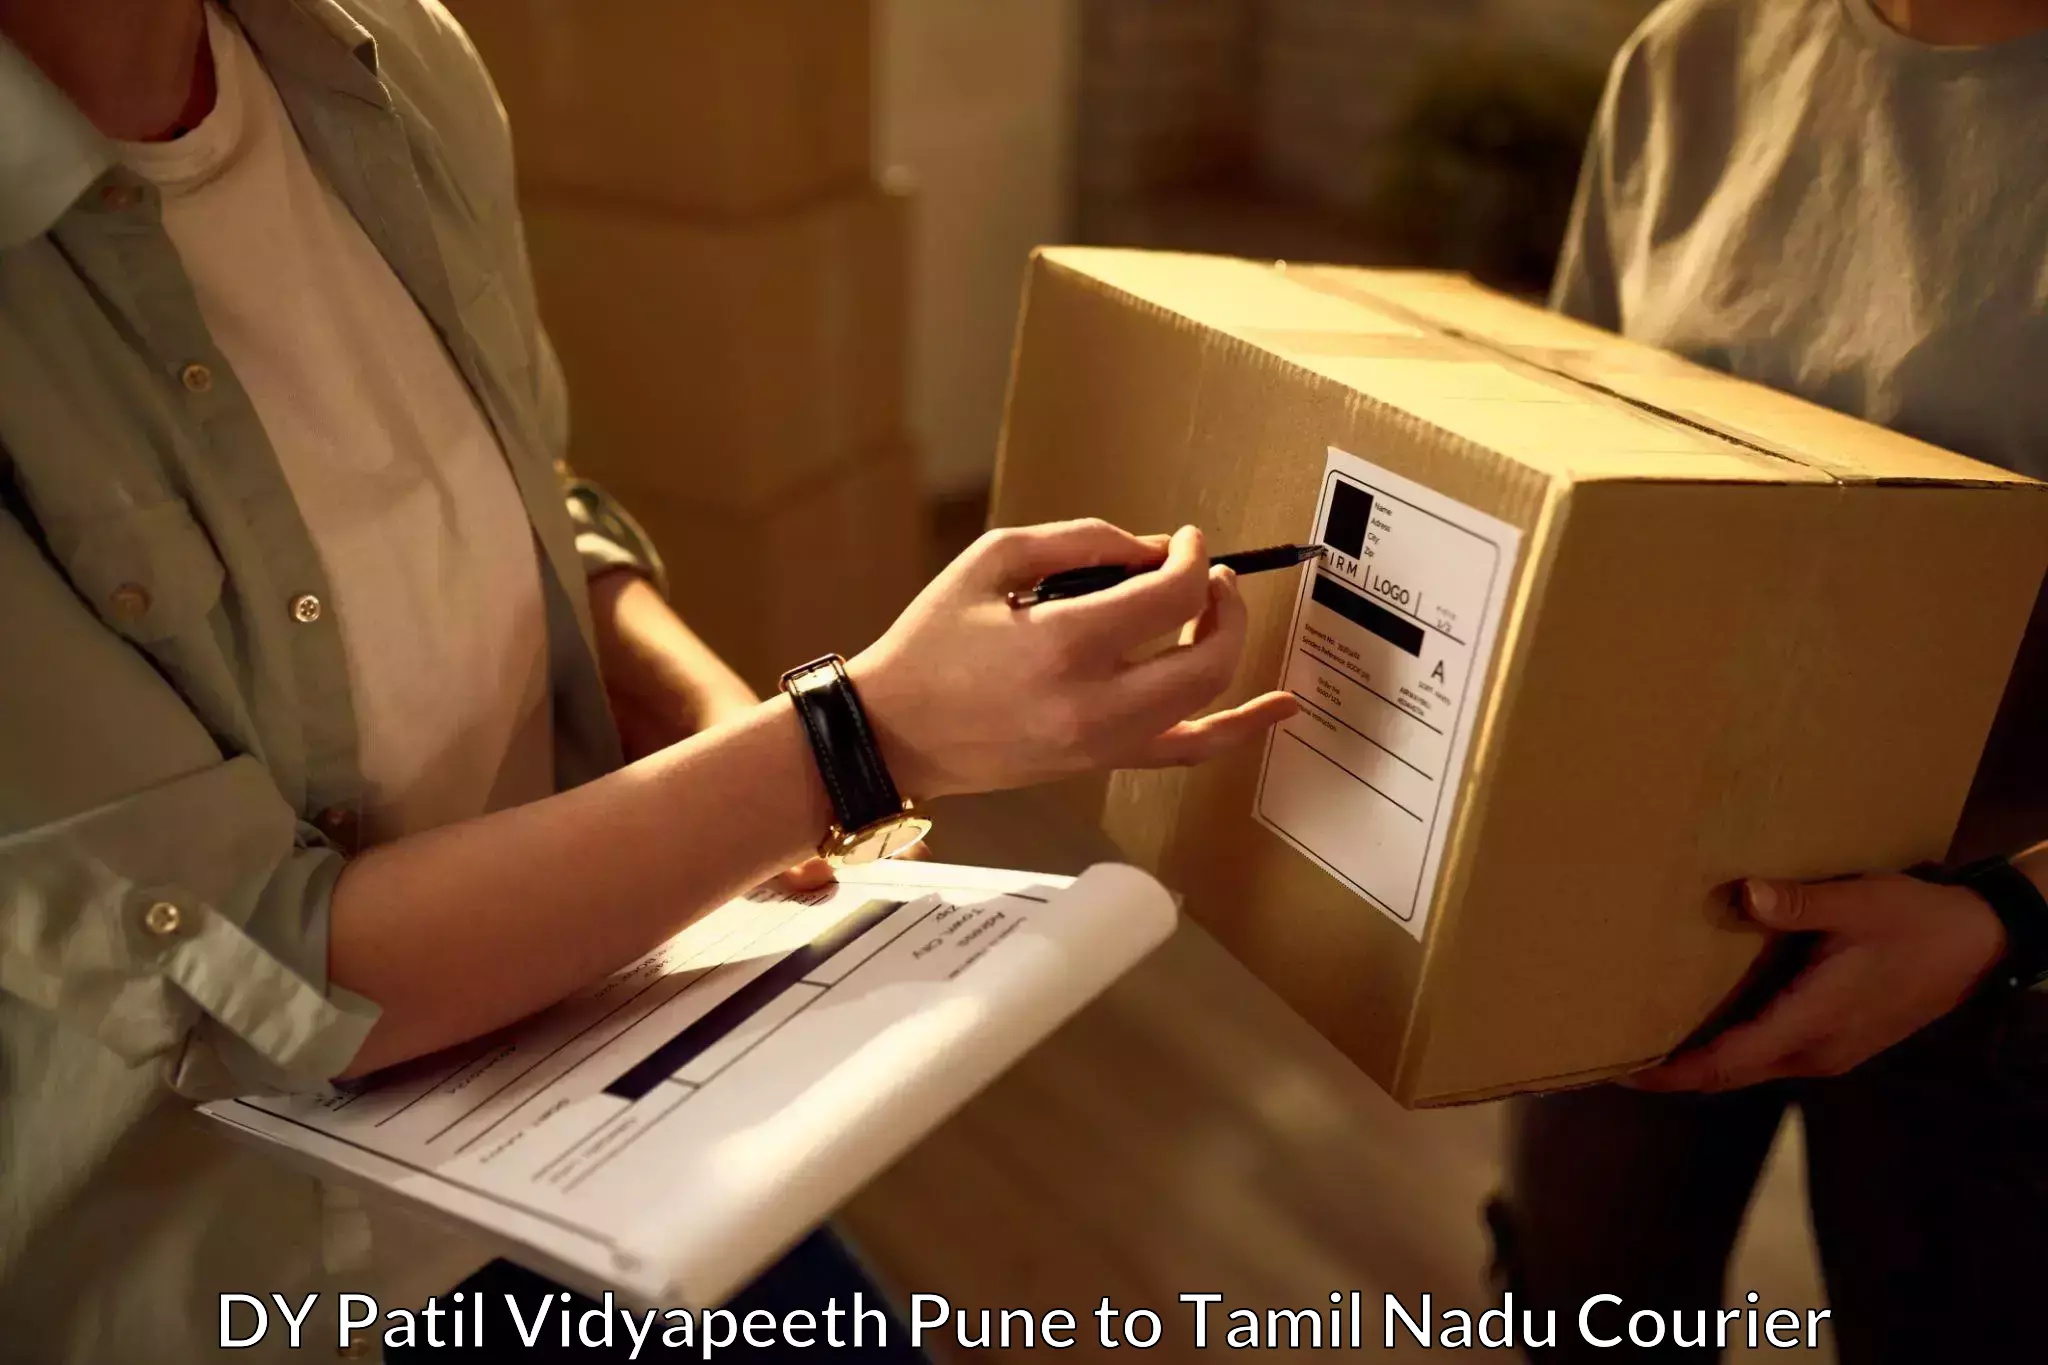 Bulk courier orders DY Patil Vidyapeeth Pune to Vriddhachalam